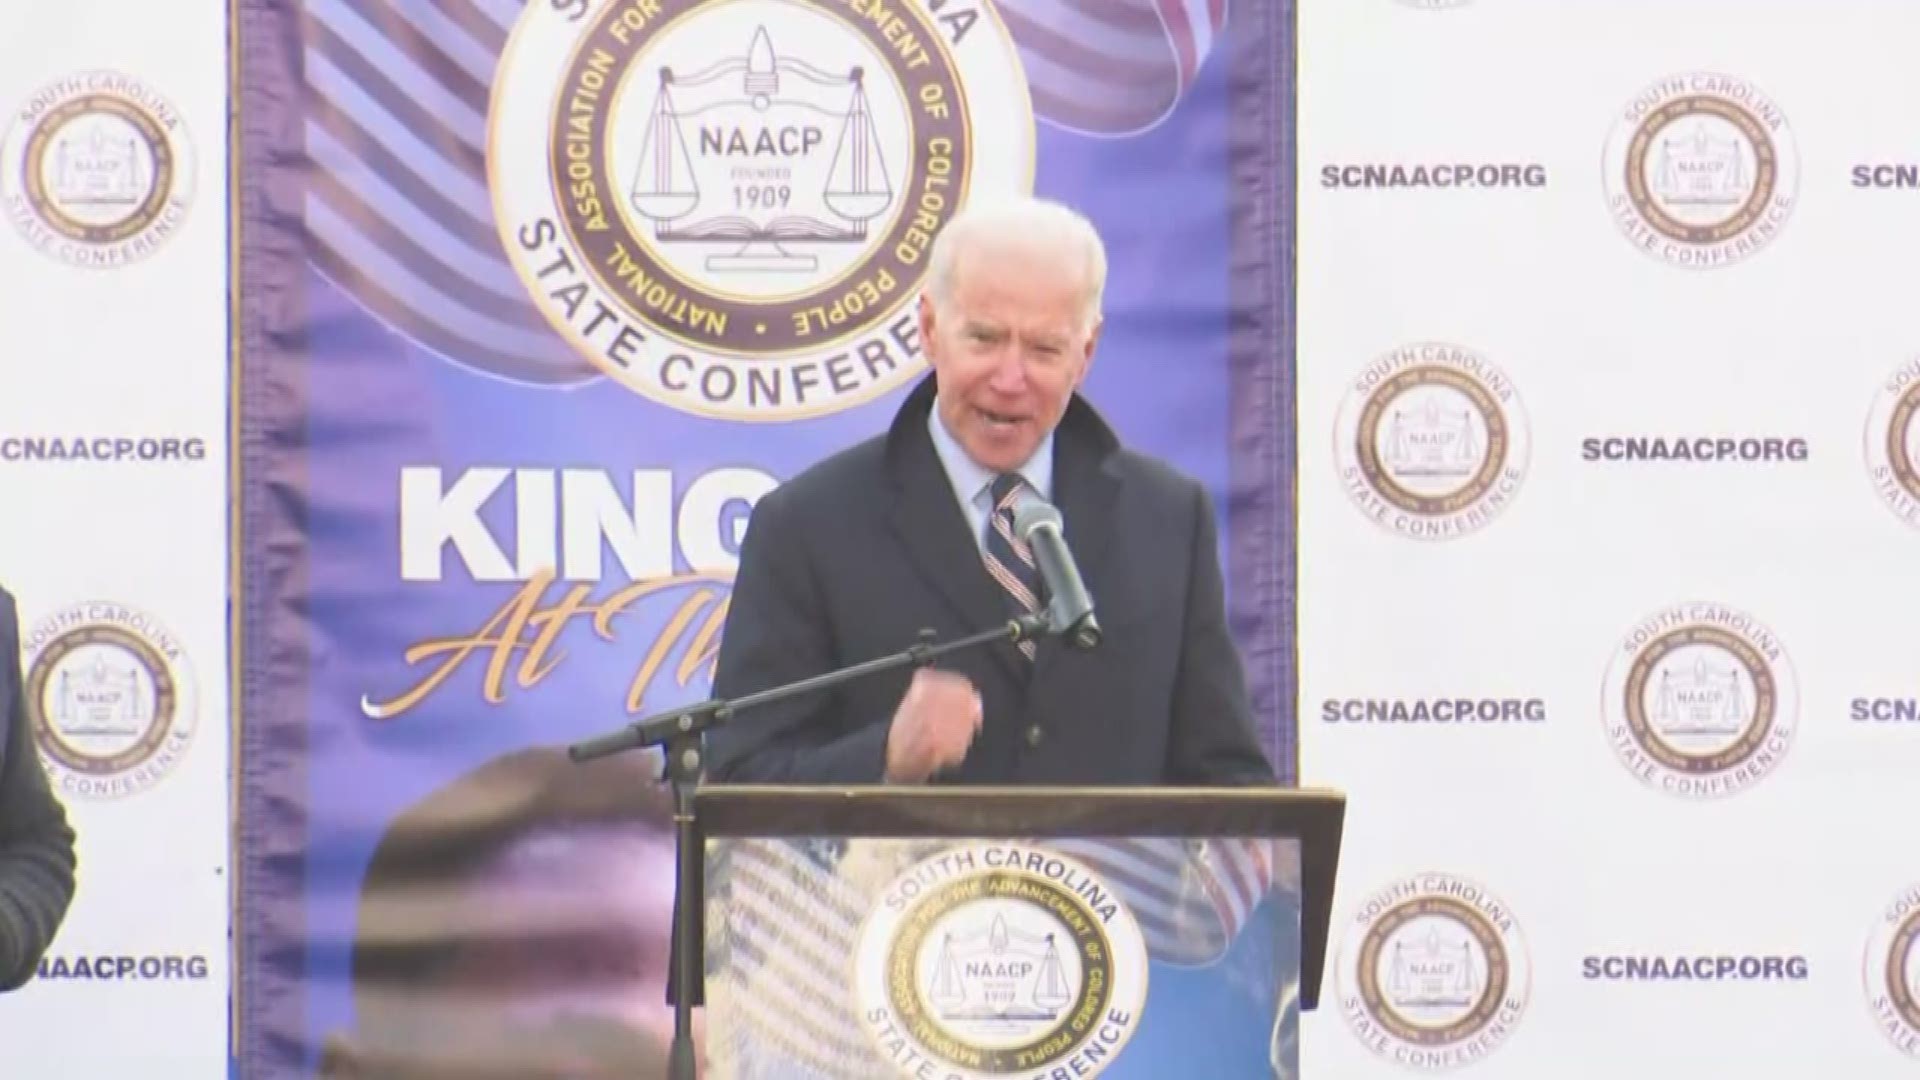 Former Vice-President Joe Biden spoke at the King Day at the Dome rally in Columbia, South Carolina on January 20, 2020.